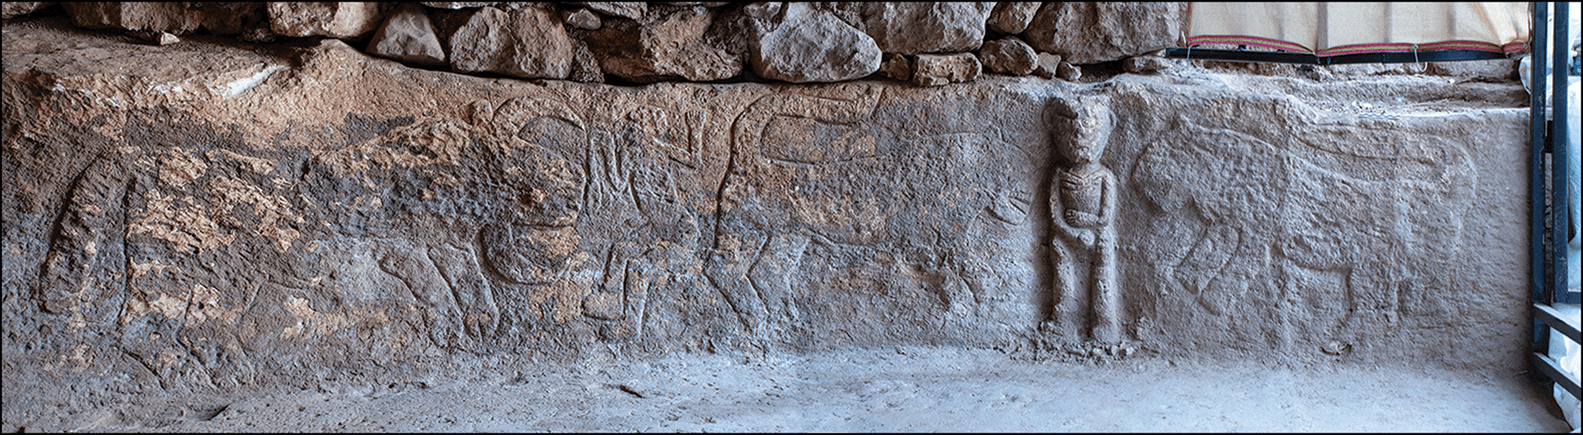 11,000-Year-Old Wall Carving in Turkey Could Be Some of the Oldest Narrative Art